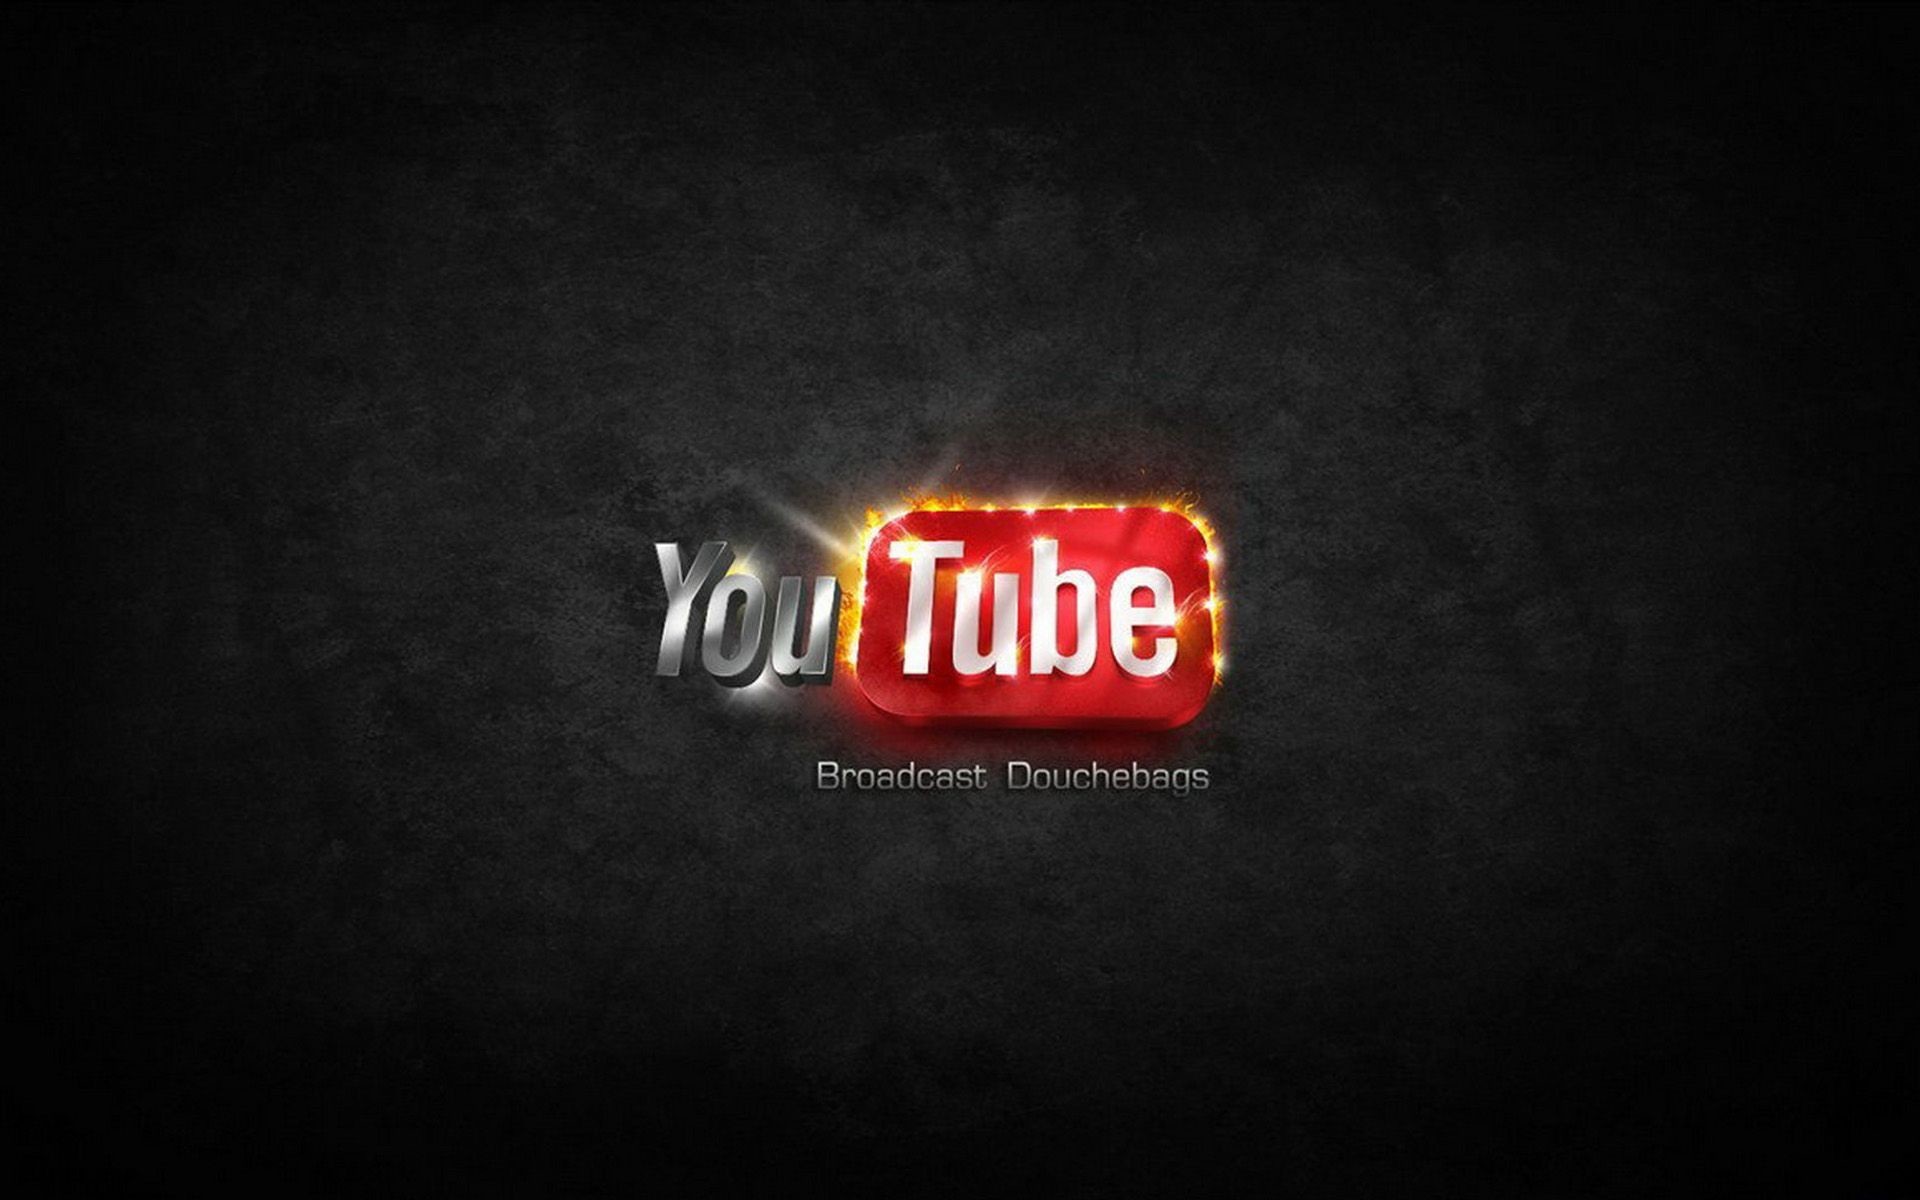 1920x1200 YouTube - Wallpapers image - Mod DB